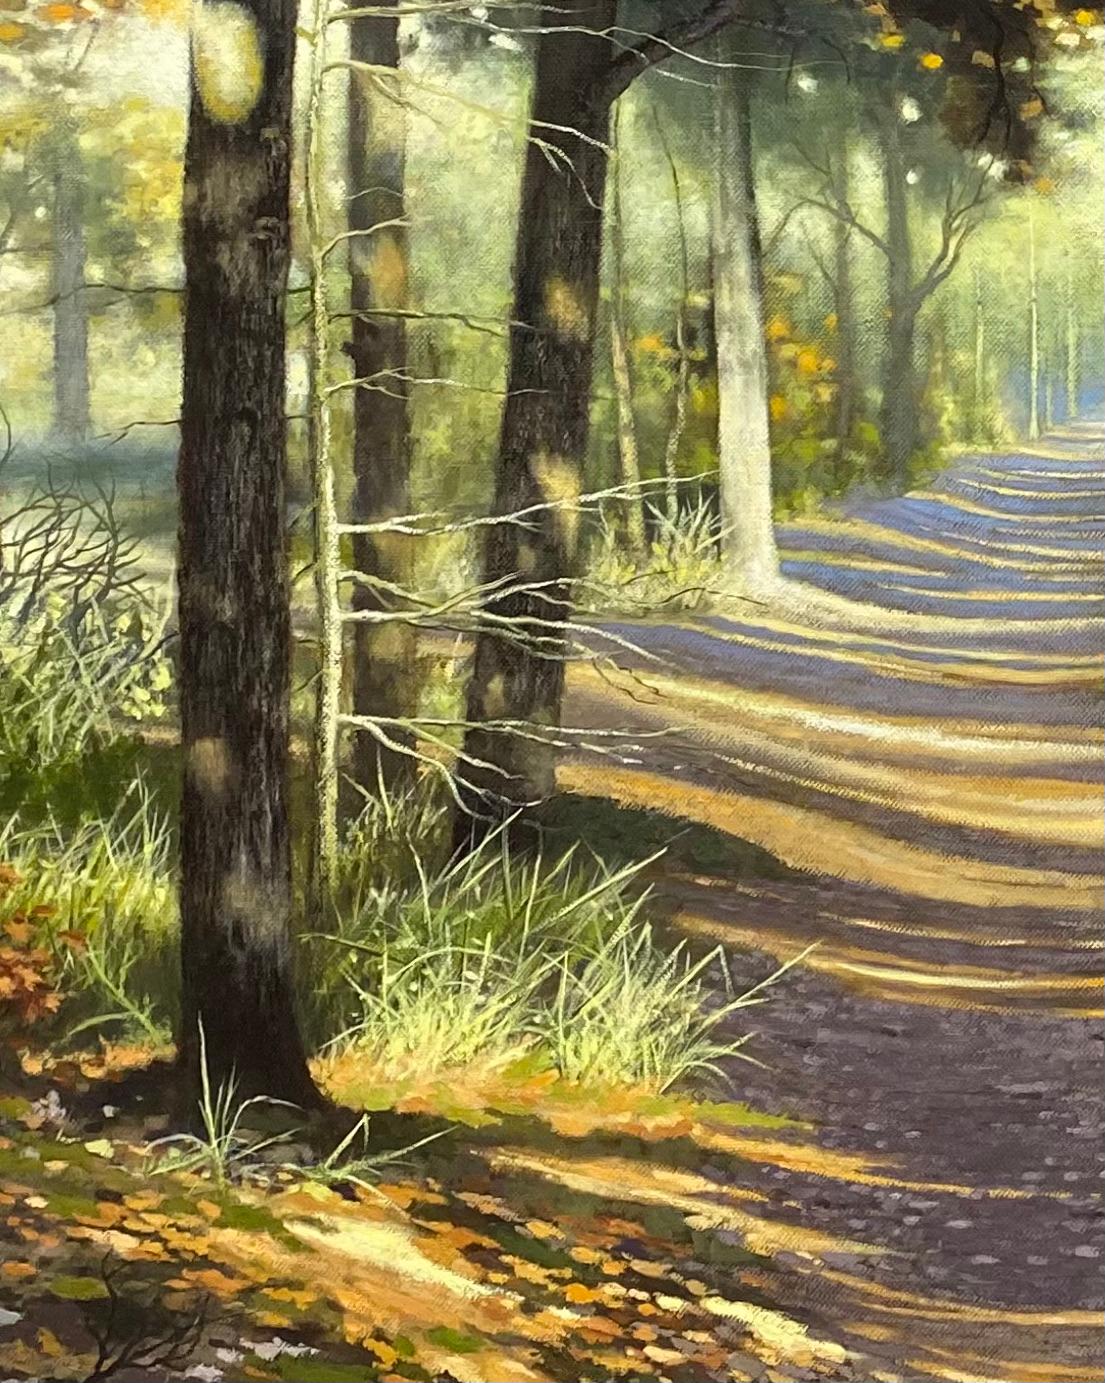 Path in the Sun- 21st Century Contemporary Dutch Landscape Painting - Brown Figurative Painting by Jan Smits